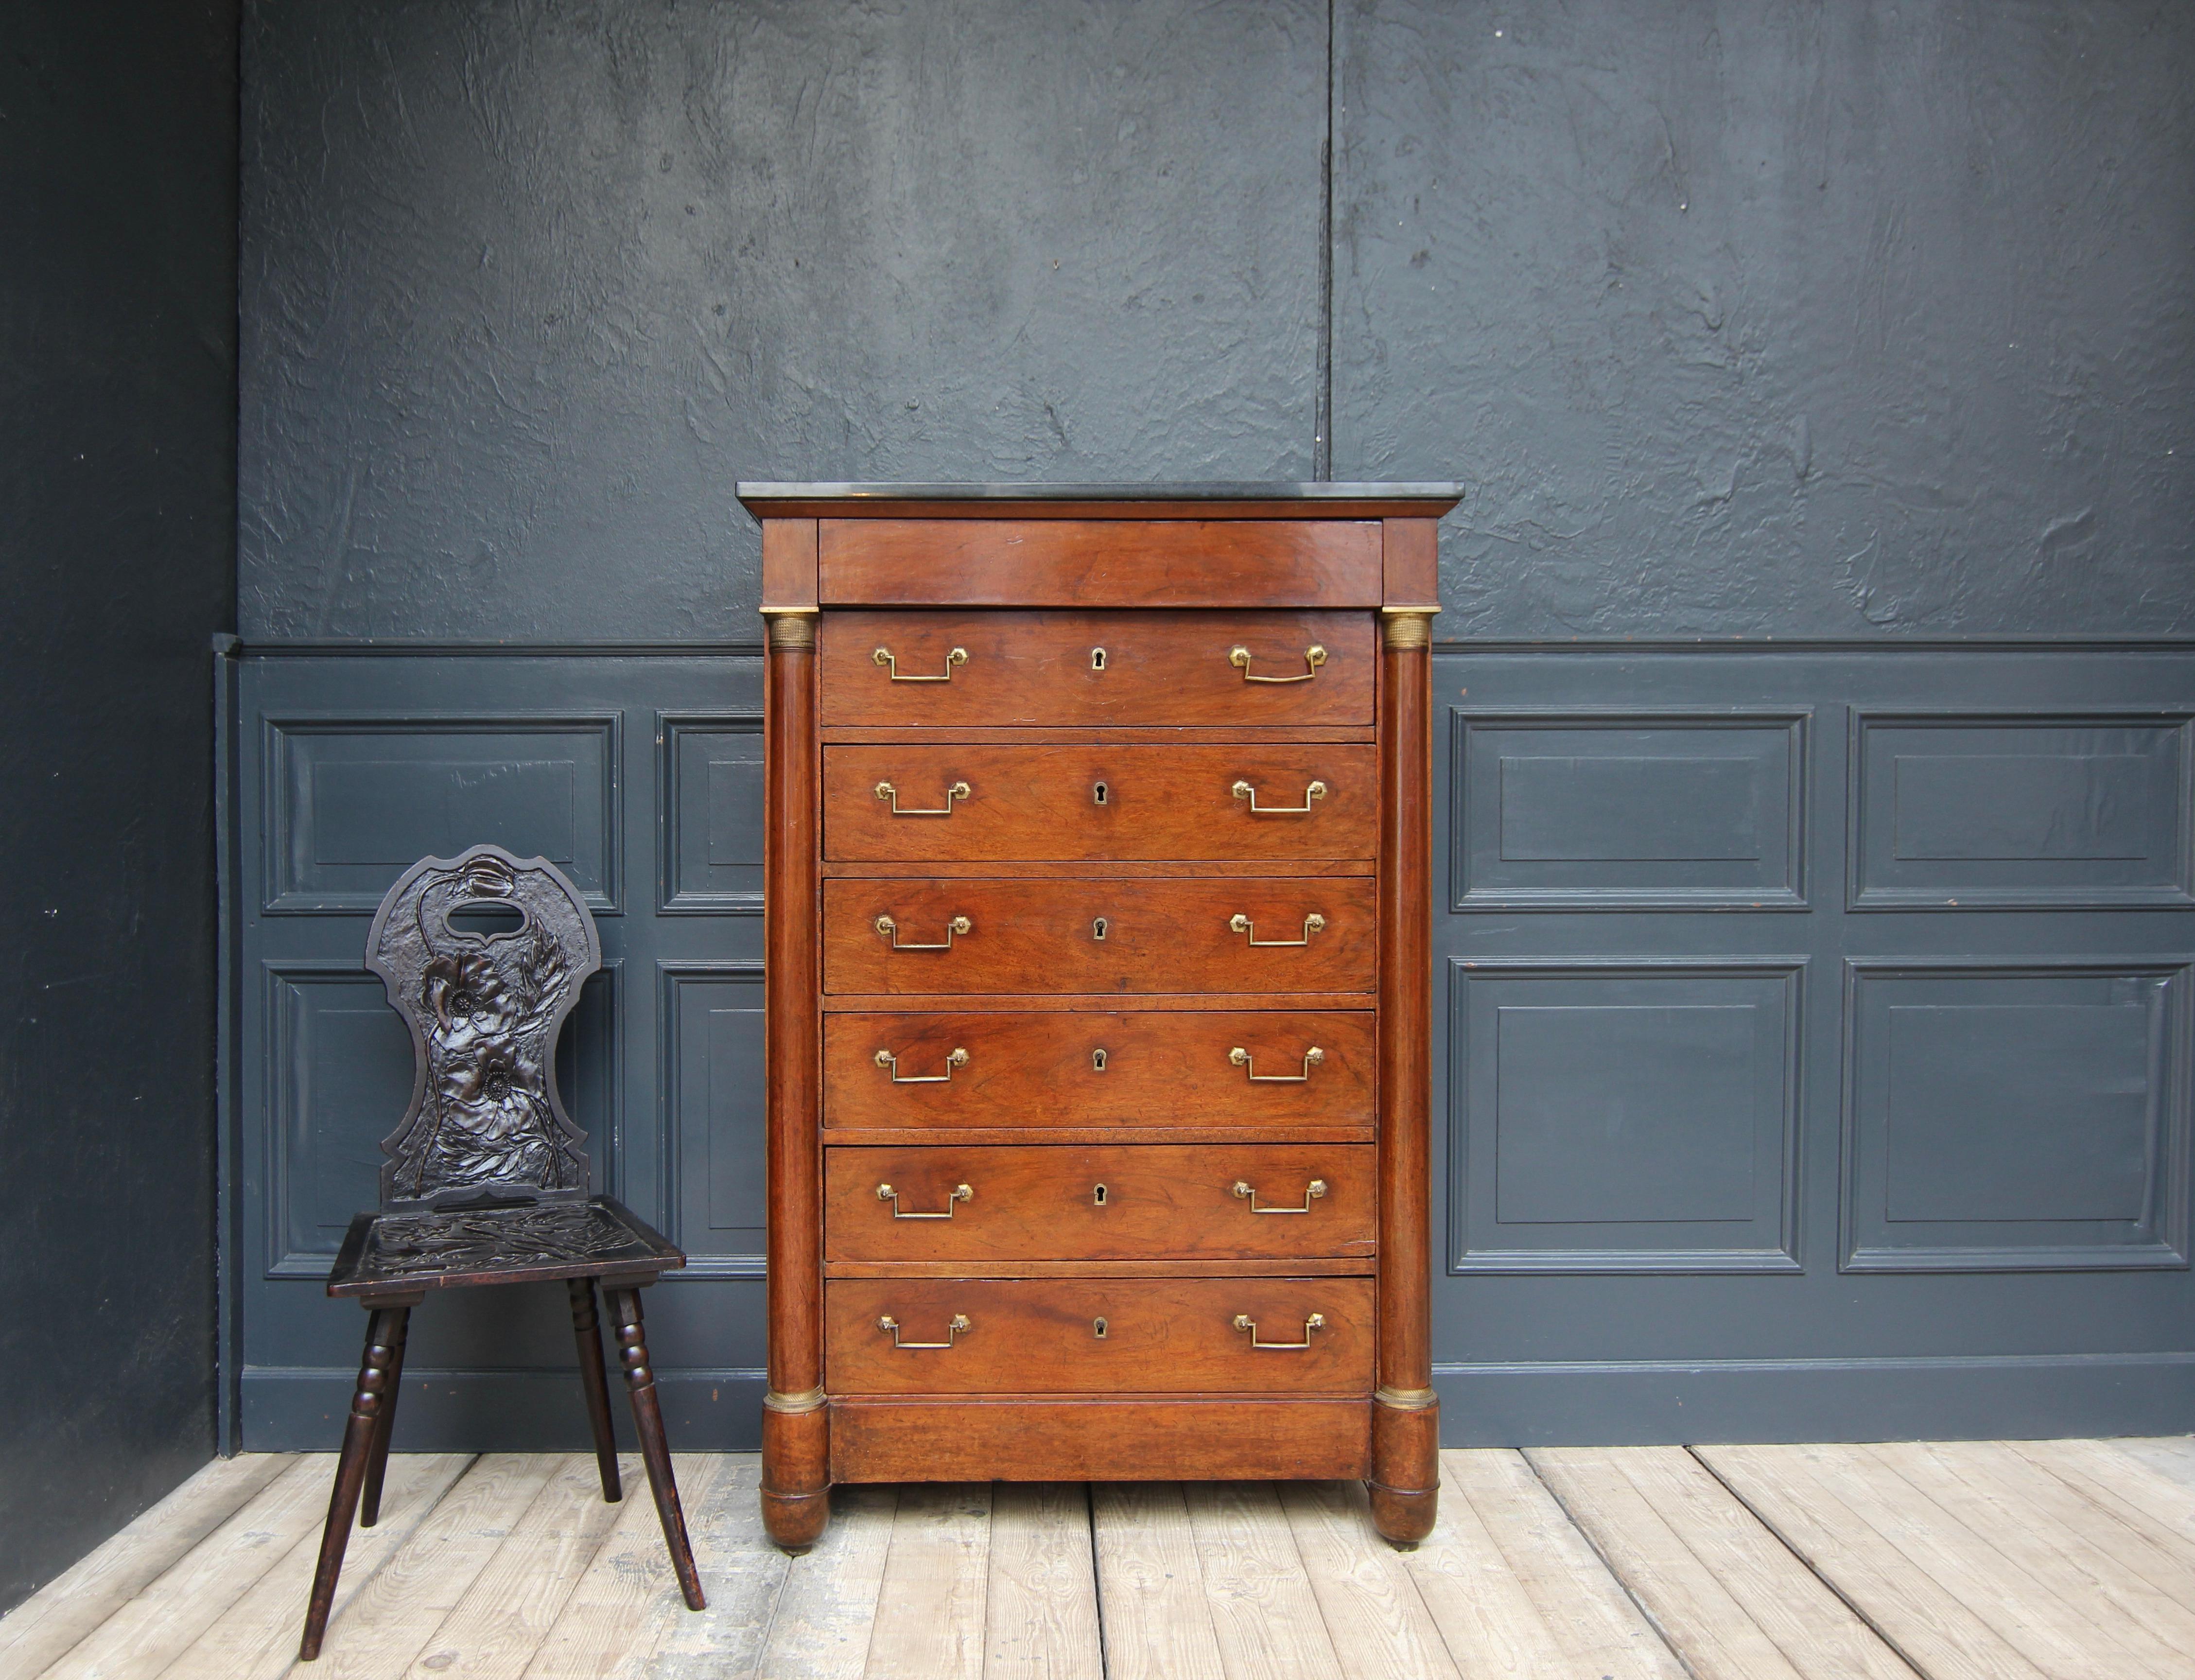 A 19th century French Empire high chest of drawers, so-called 